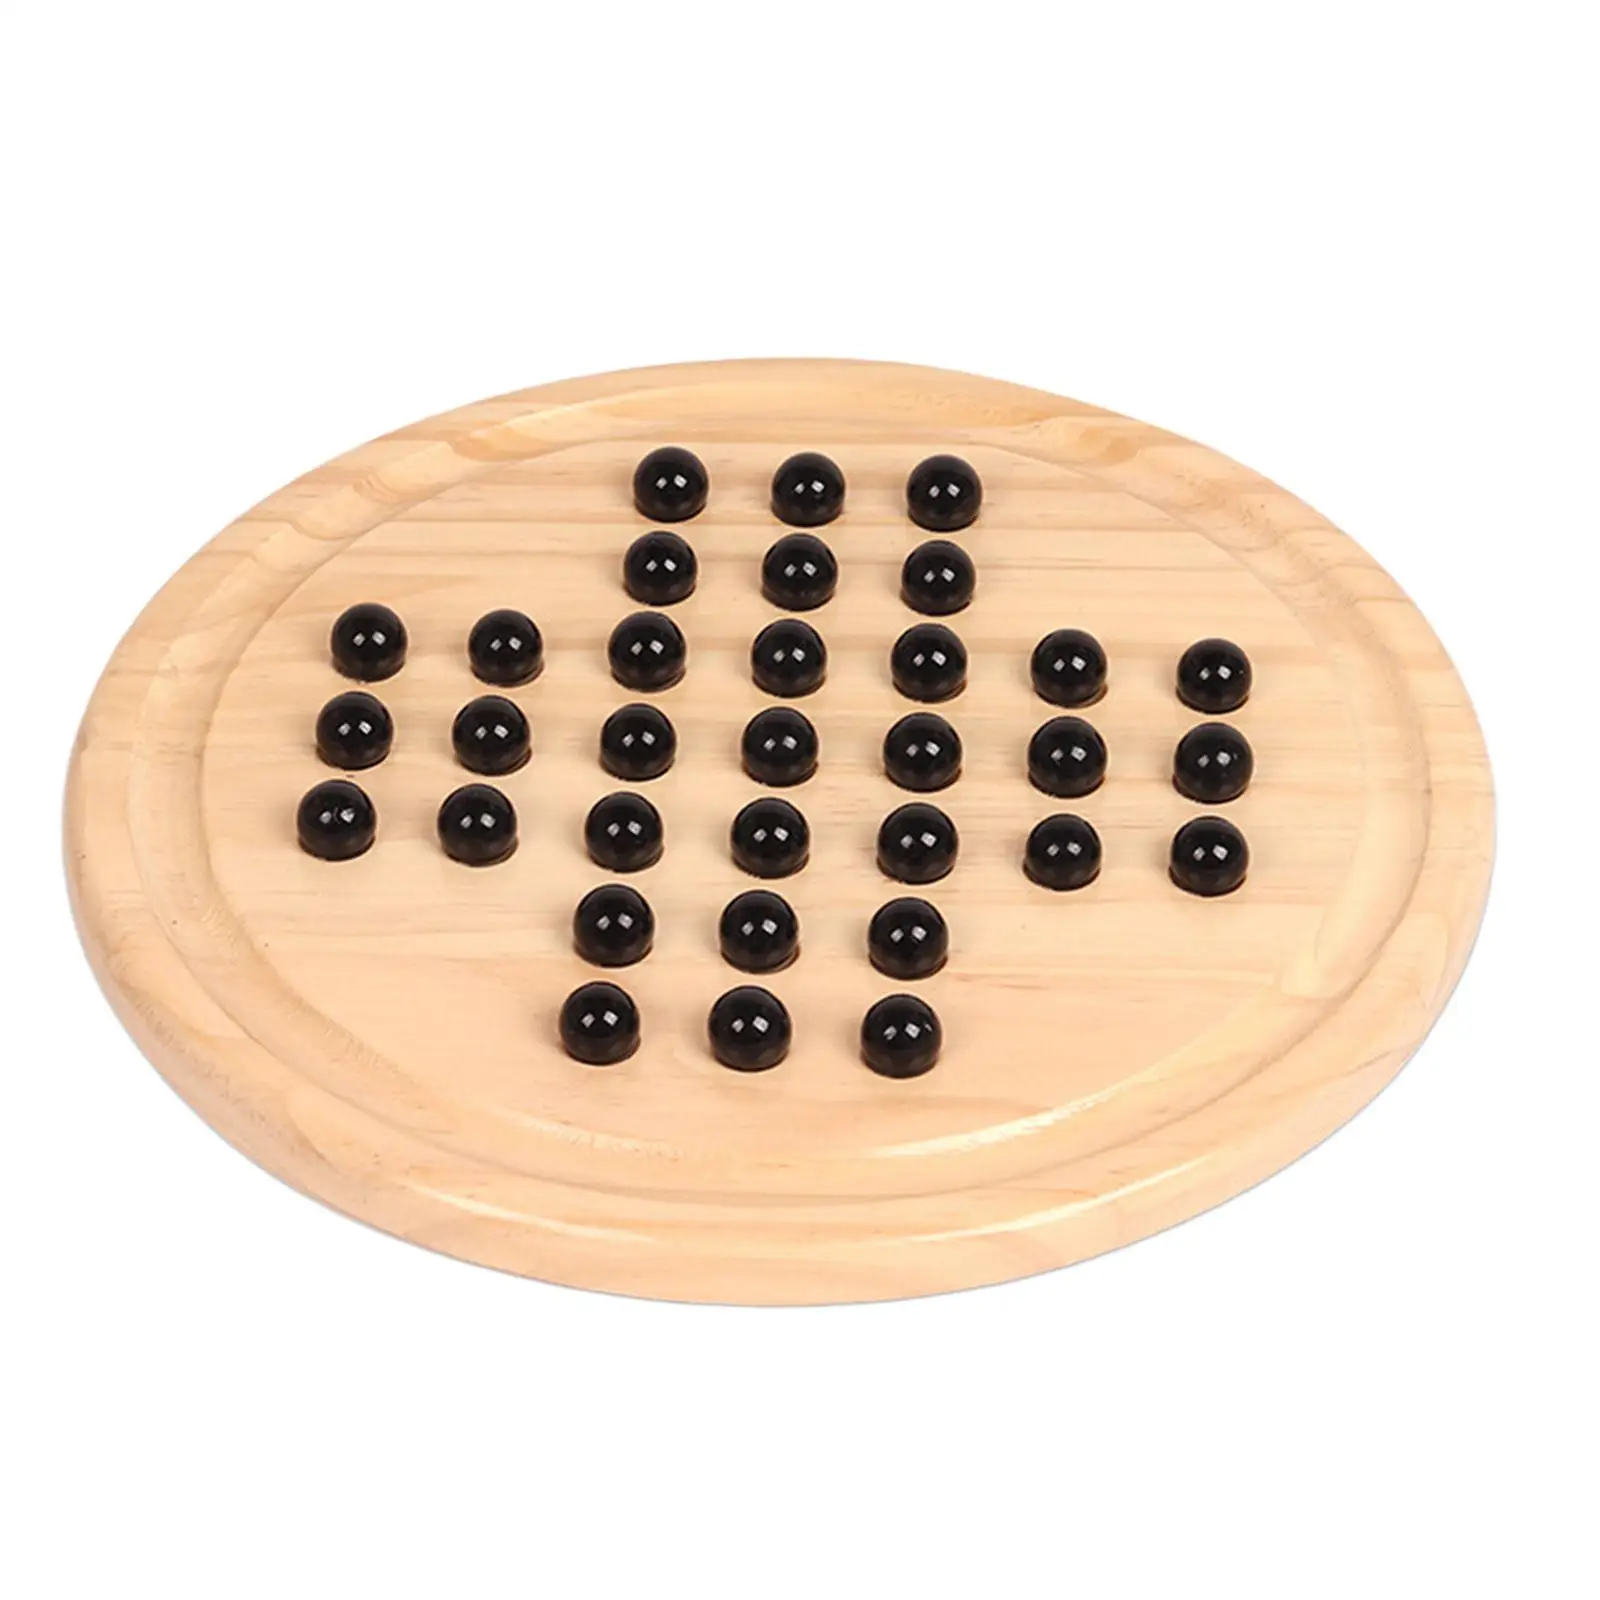 Echter punt Absorberen Wooden Peg Solitaire Board Game With 33 Glass Balls Pegs For Kids - Puzzles  - AliExpress